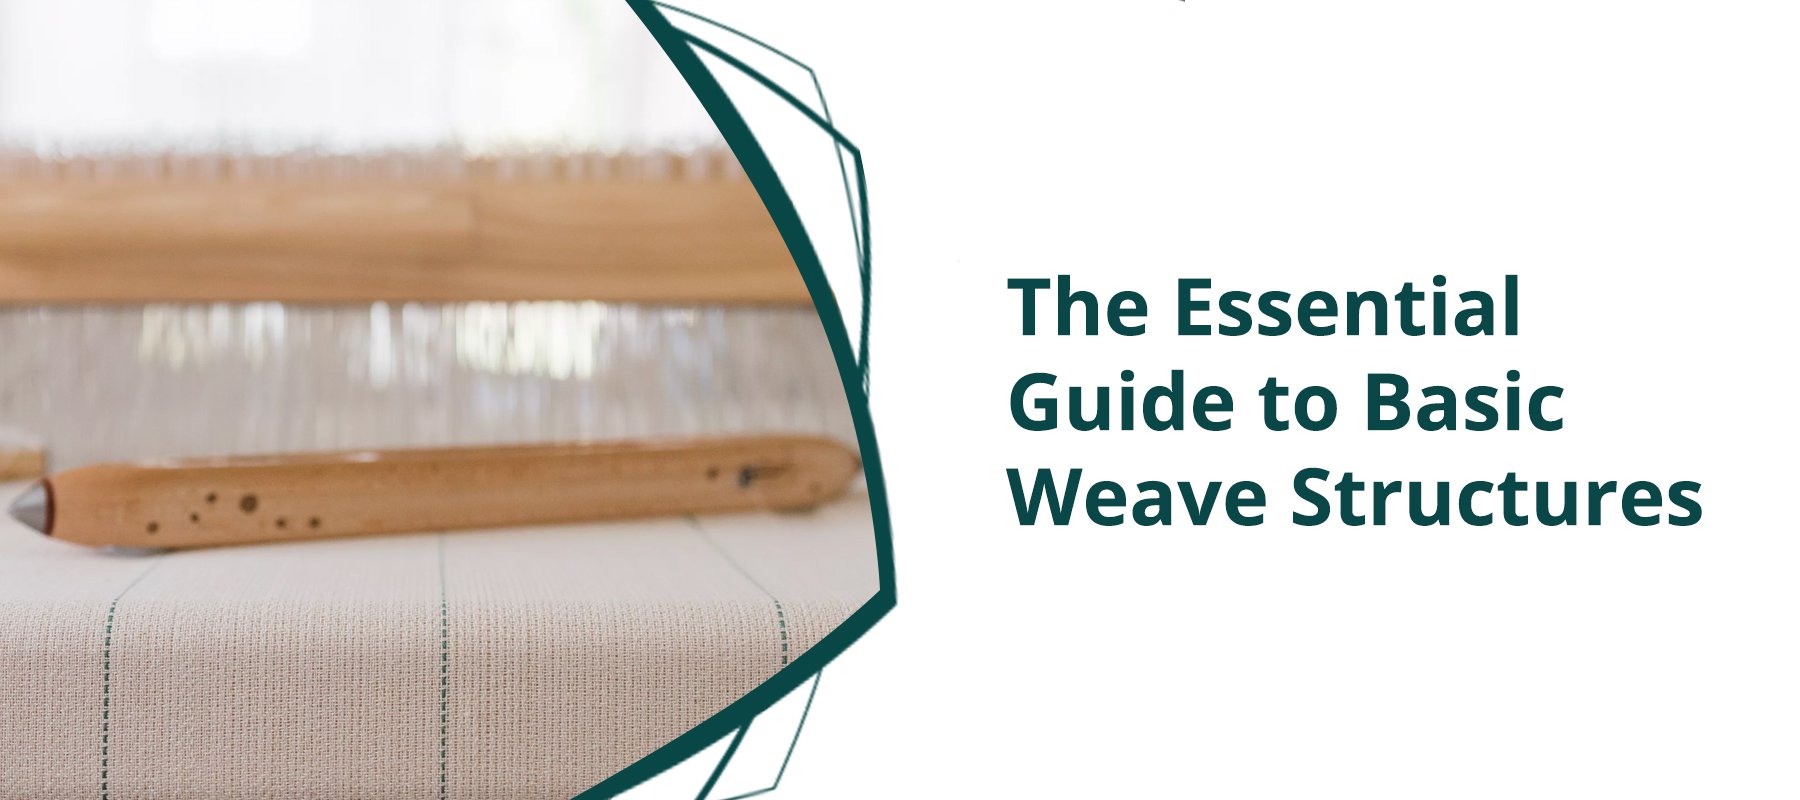 The Essential Guide to Basic Weave Structures